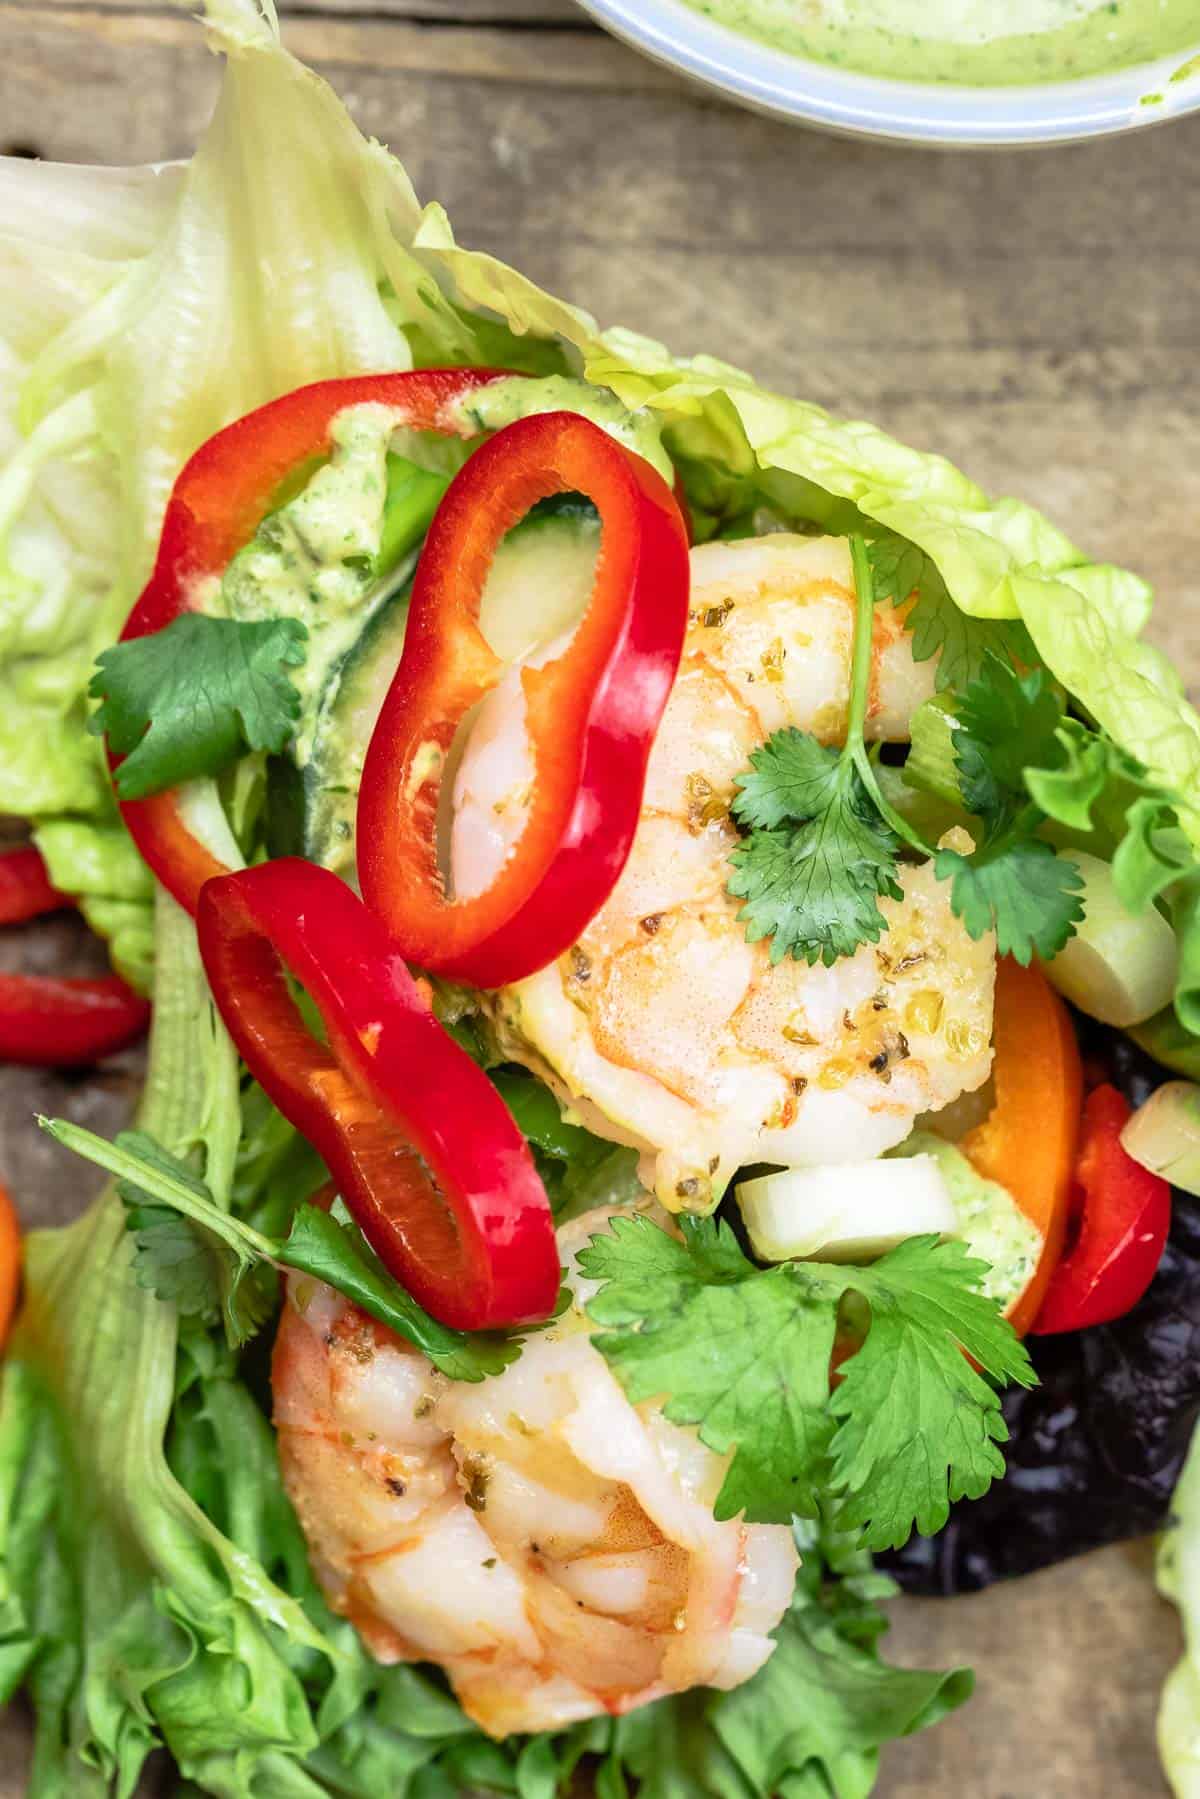 lettuce wraps with shrimp, peppers, Italian parsley, and green onion